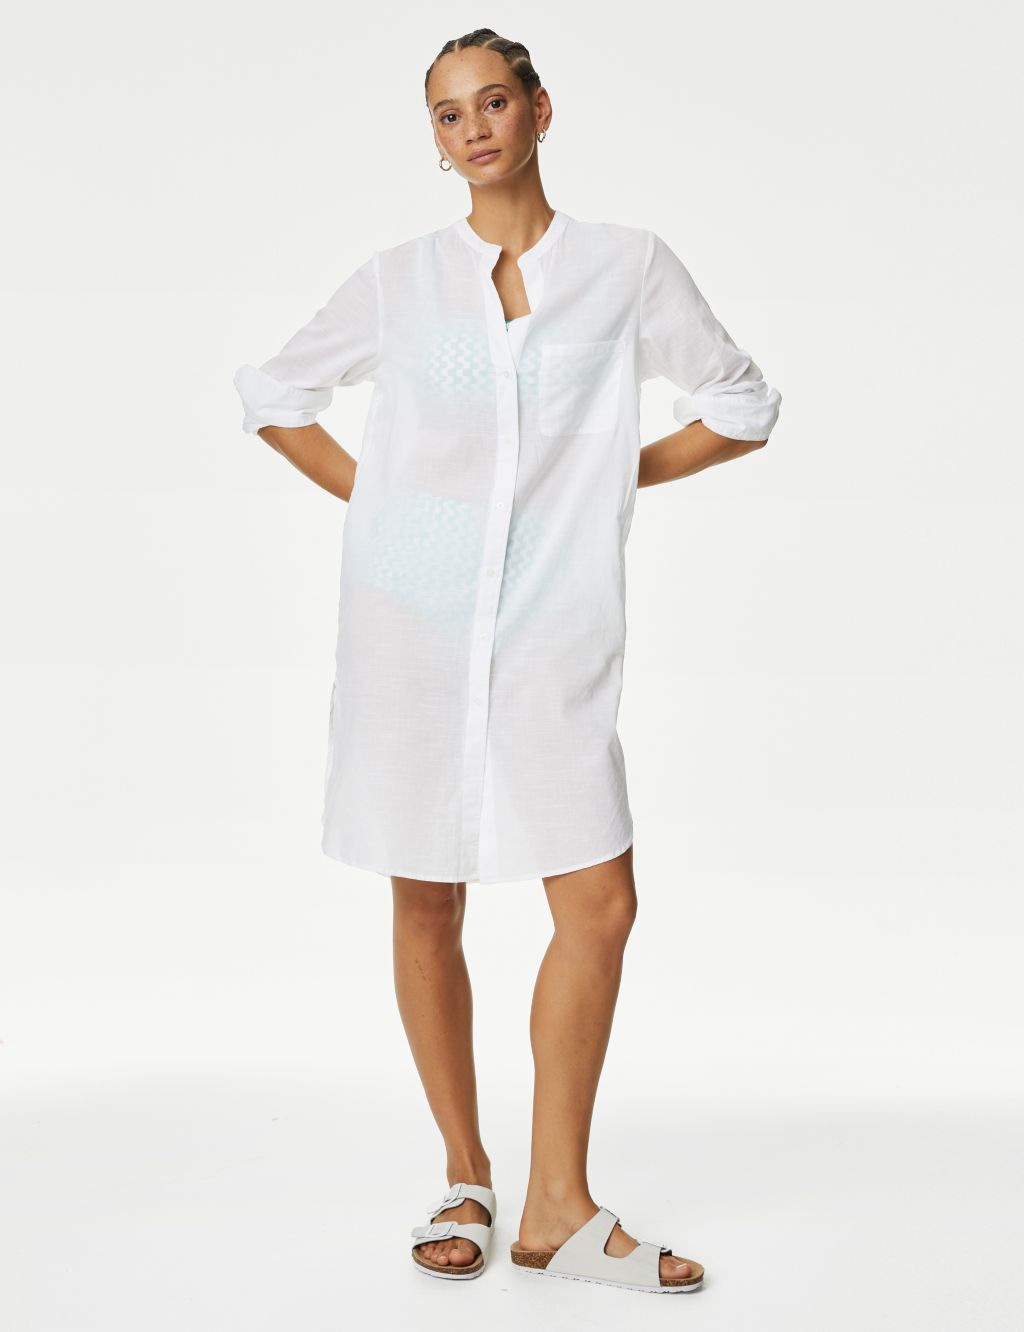 Pure Cotton Collarless Beach Cover Up Shirt image 2